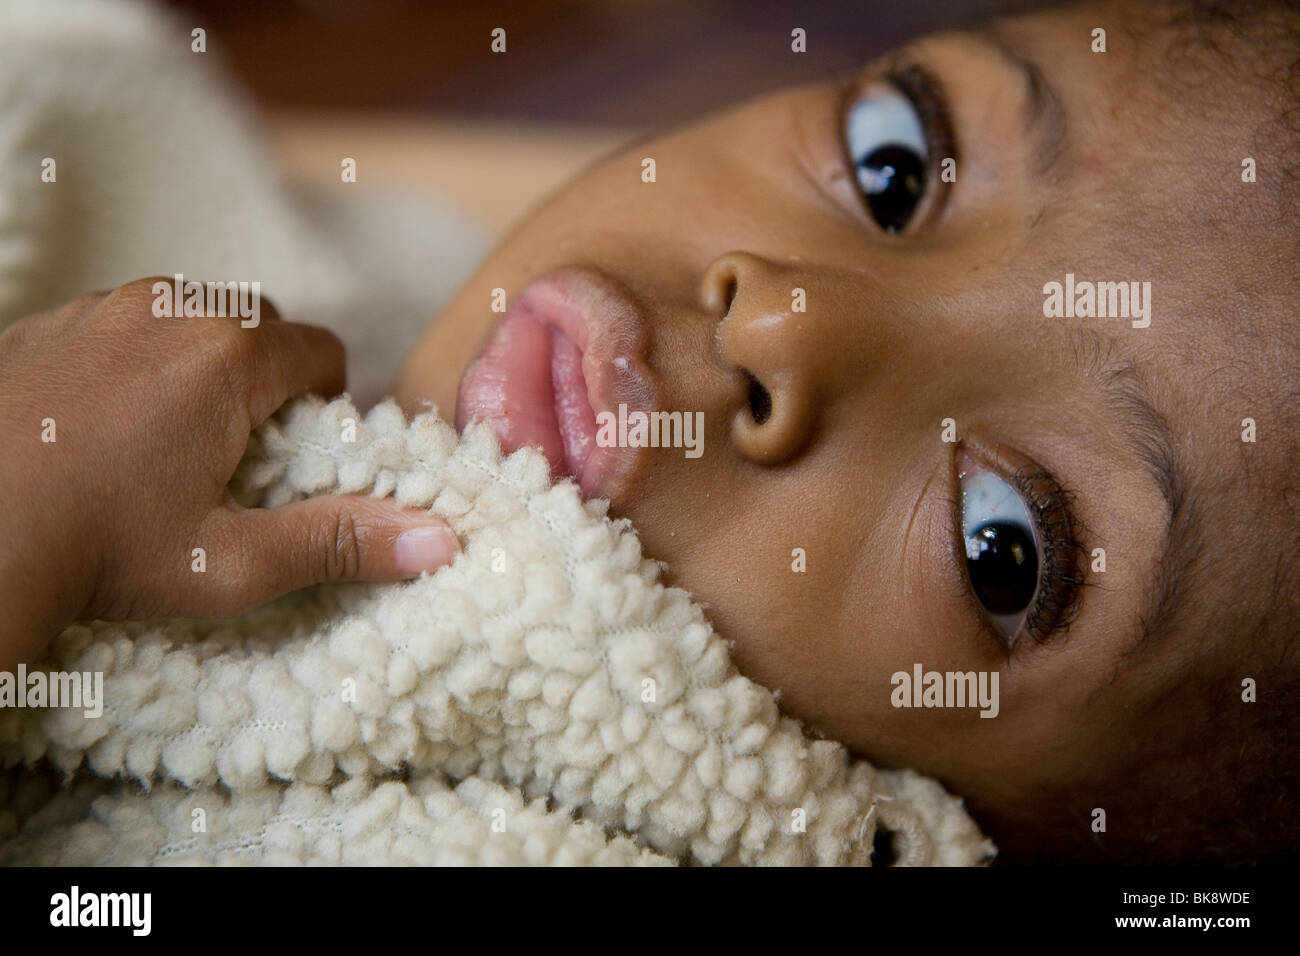 Child in orphanage - Tanzania, East Africa Stock Photo